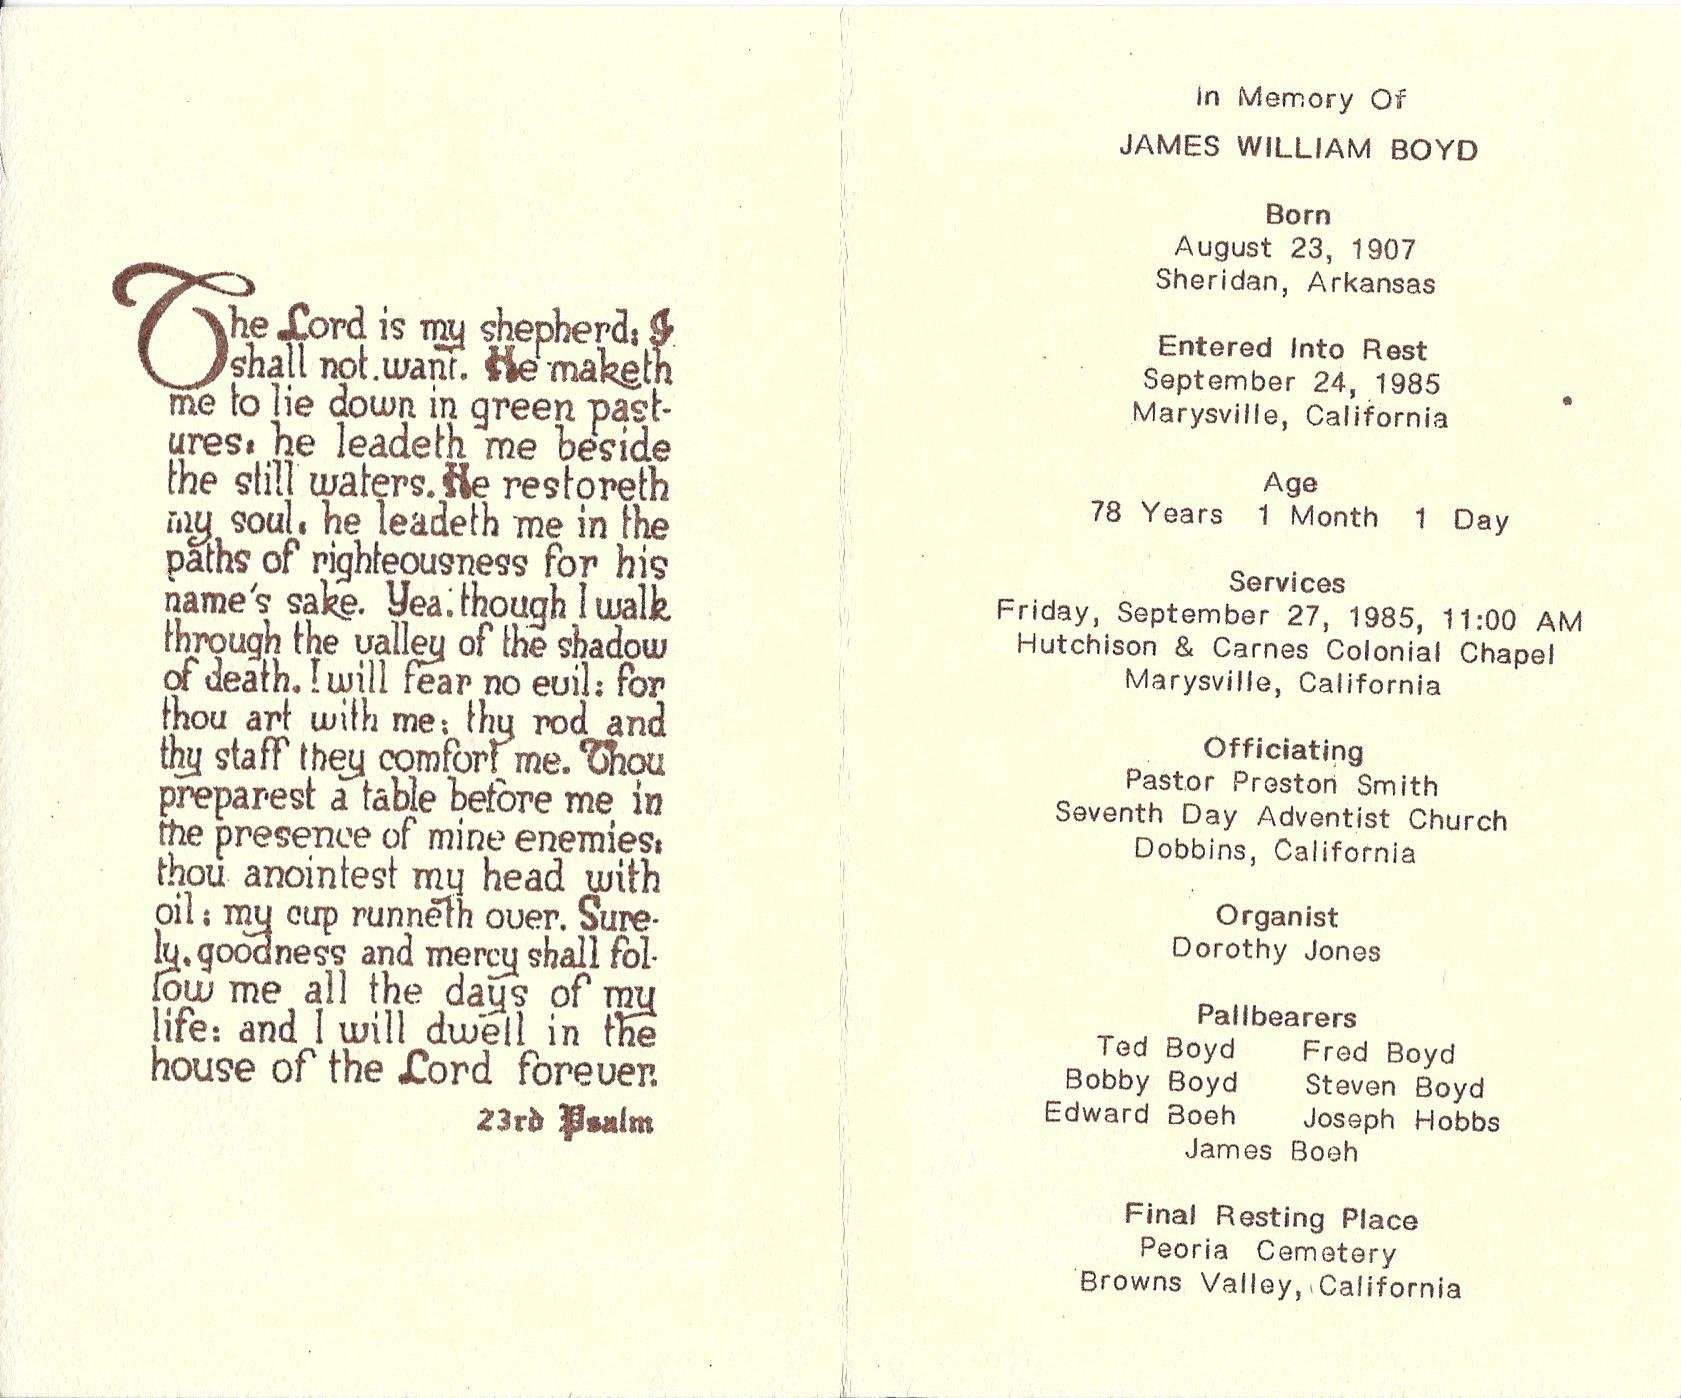 Inside of the funeral program of James William Boyd